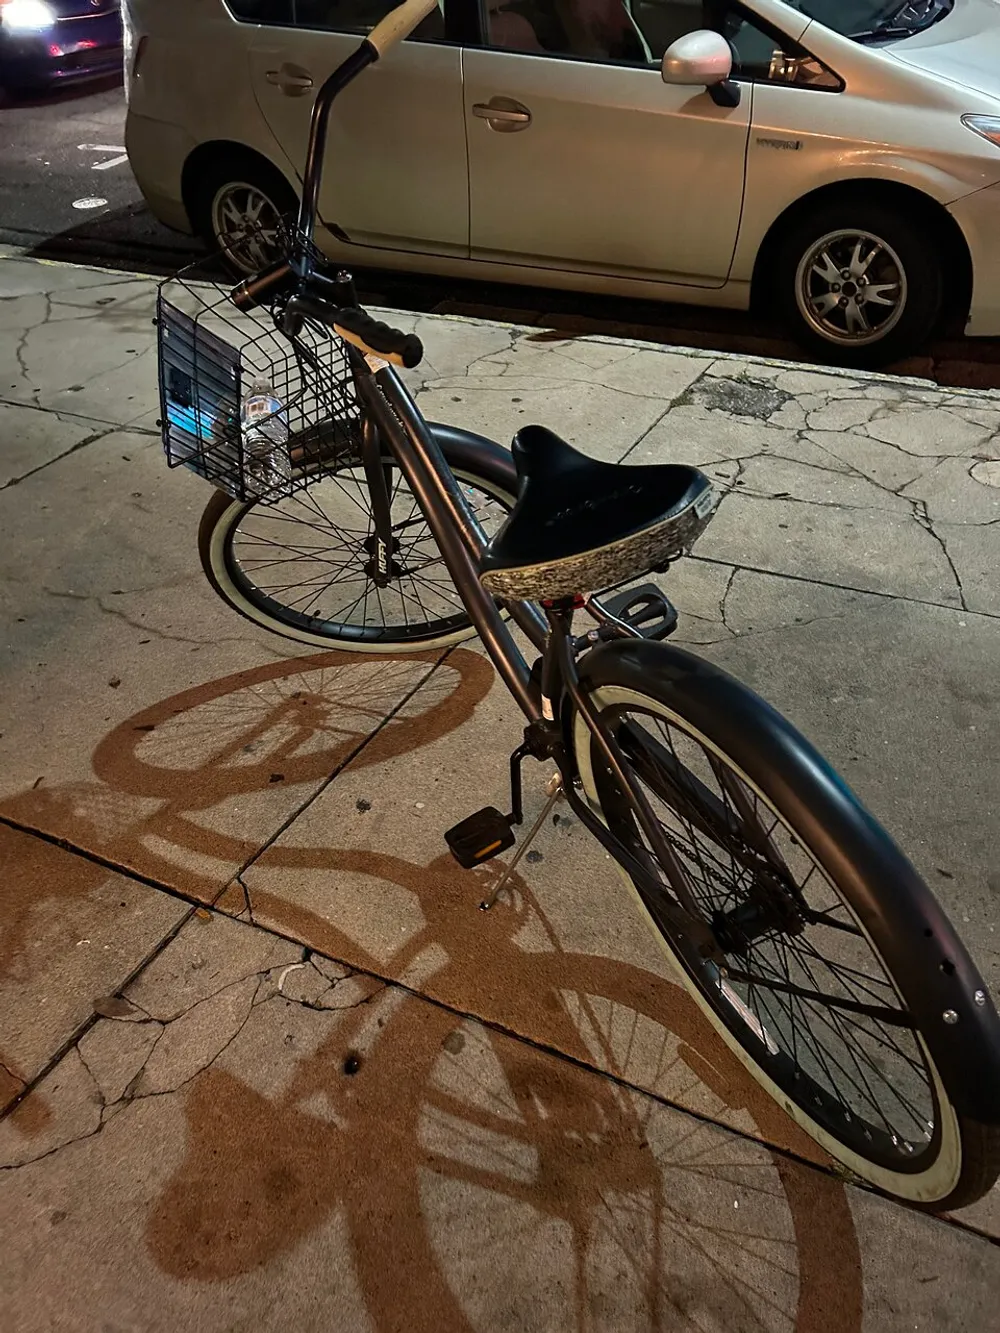 The image shows a single bicycle equipped with a front basket parked on a sidewalk at night casting a shadow under street lighting with a car parked in the background